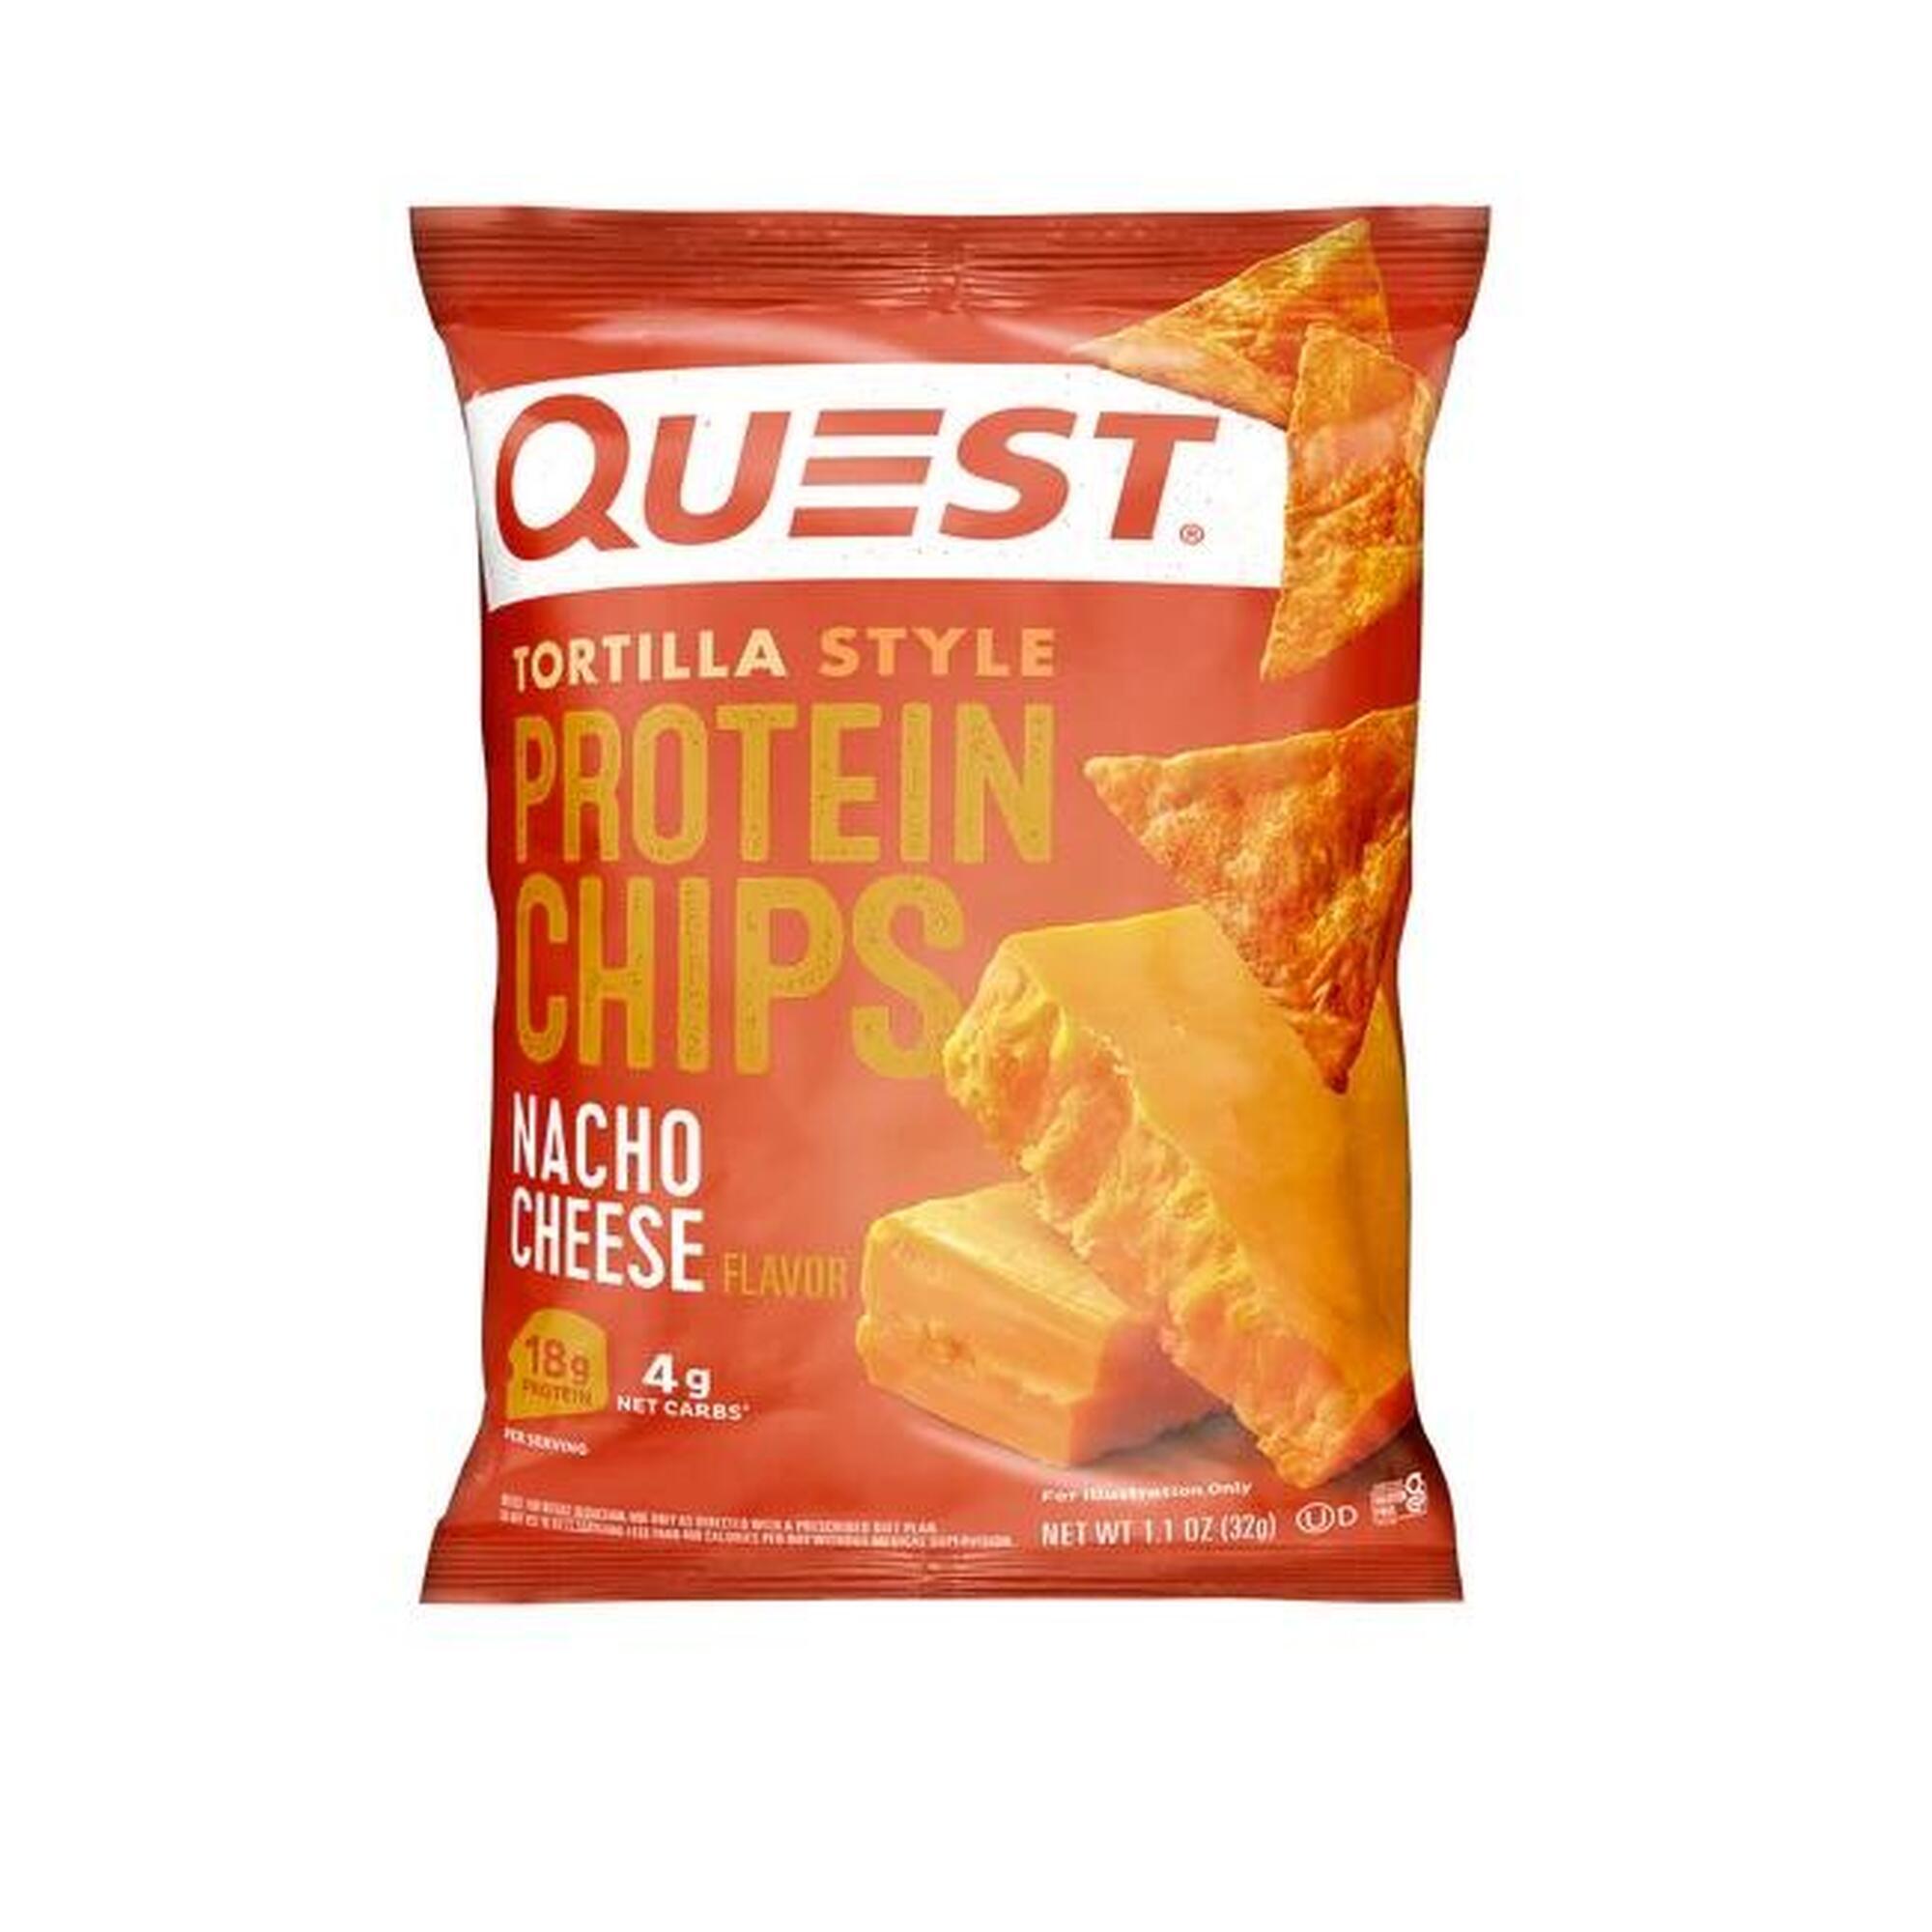 Quest Protein Chips - NACHO CHEESE - TORTILLA STYLE 8 PACKS